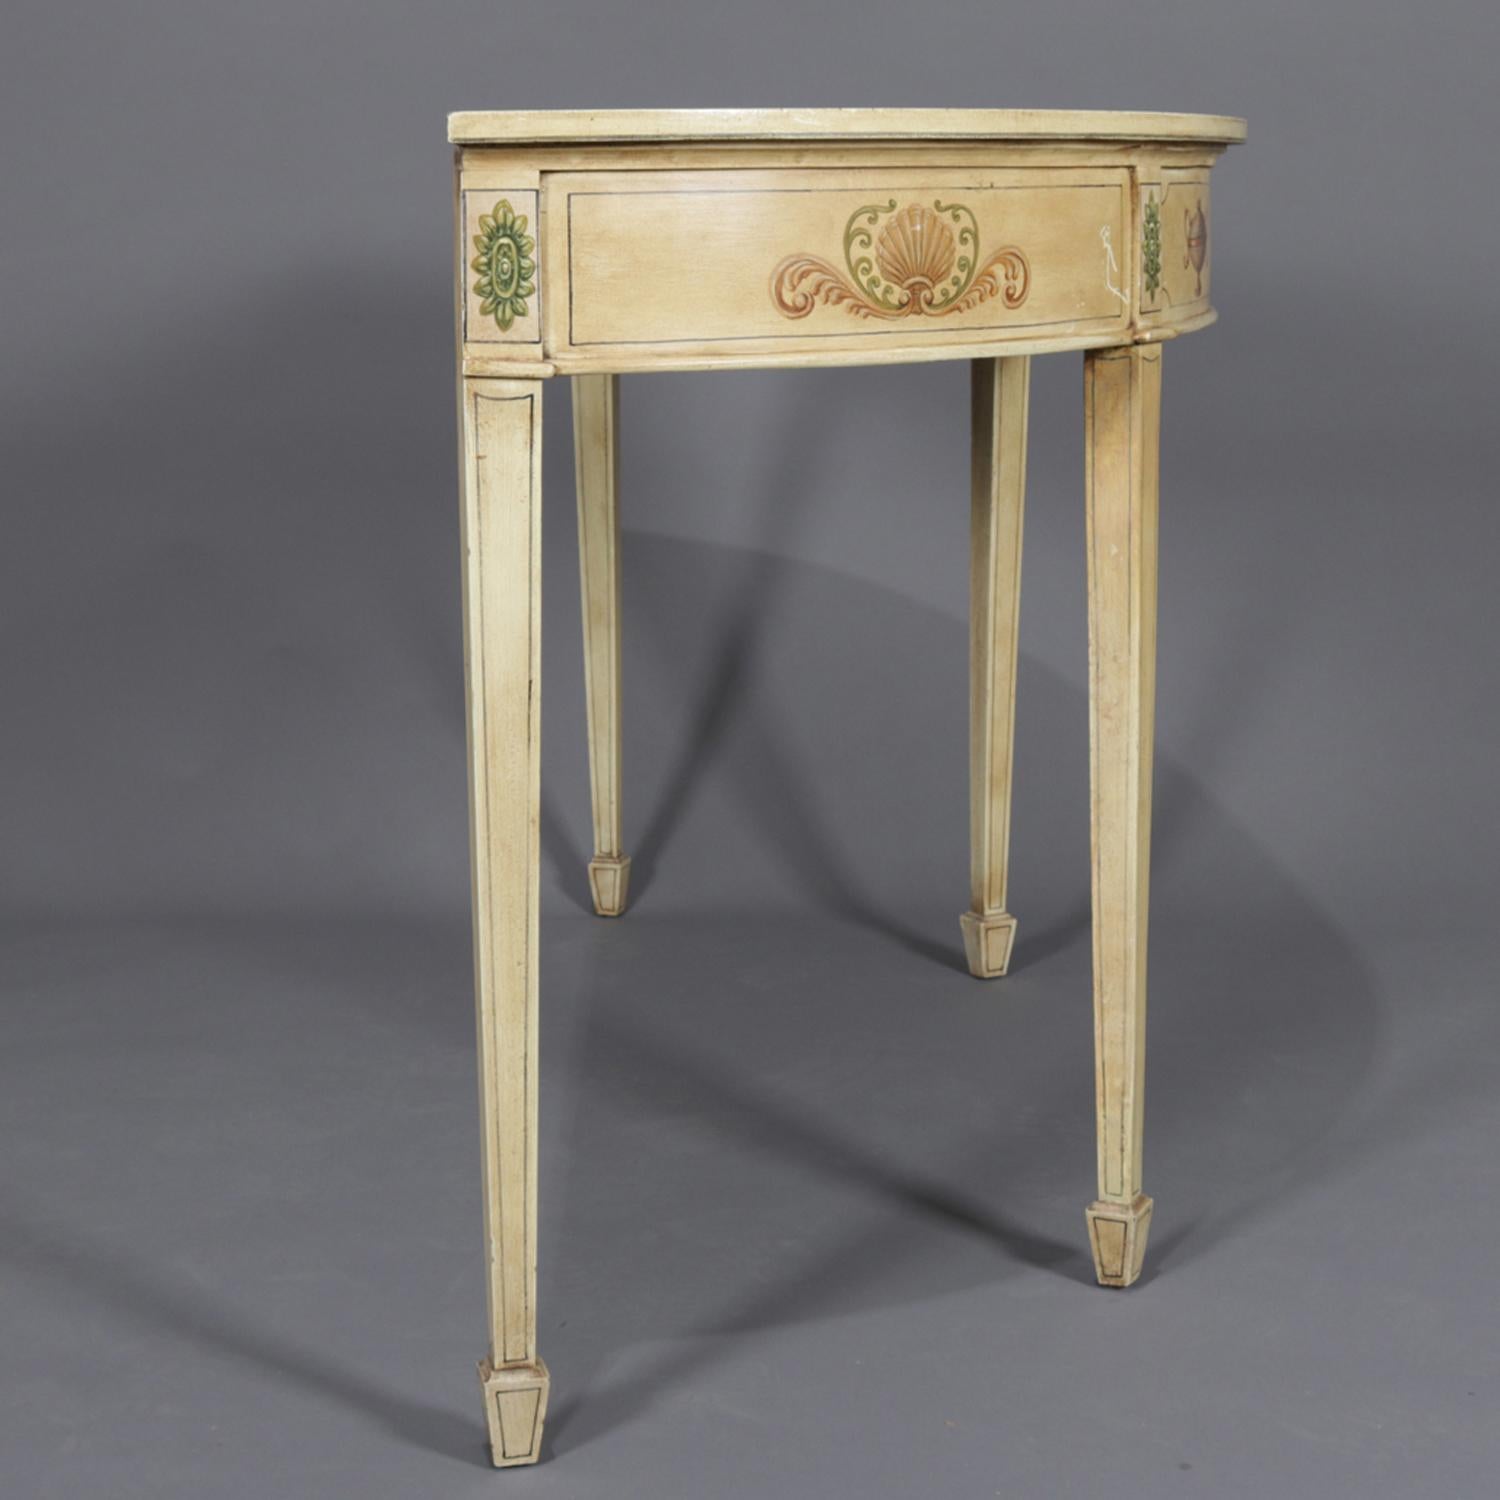 Vintage French Neoclassical Paint & Gilt Decorated Demilune Console Table (Geschnitzt)